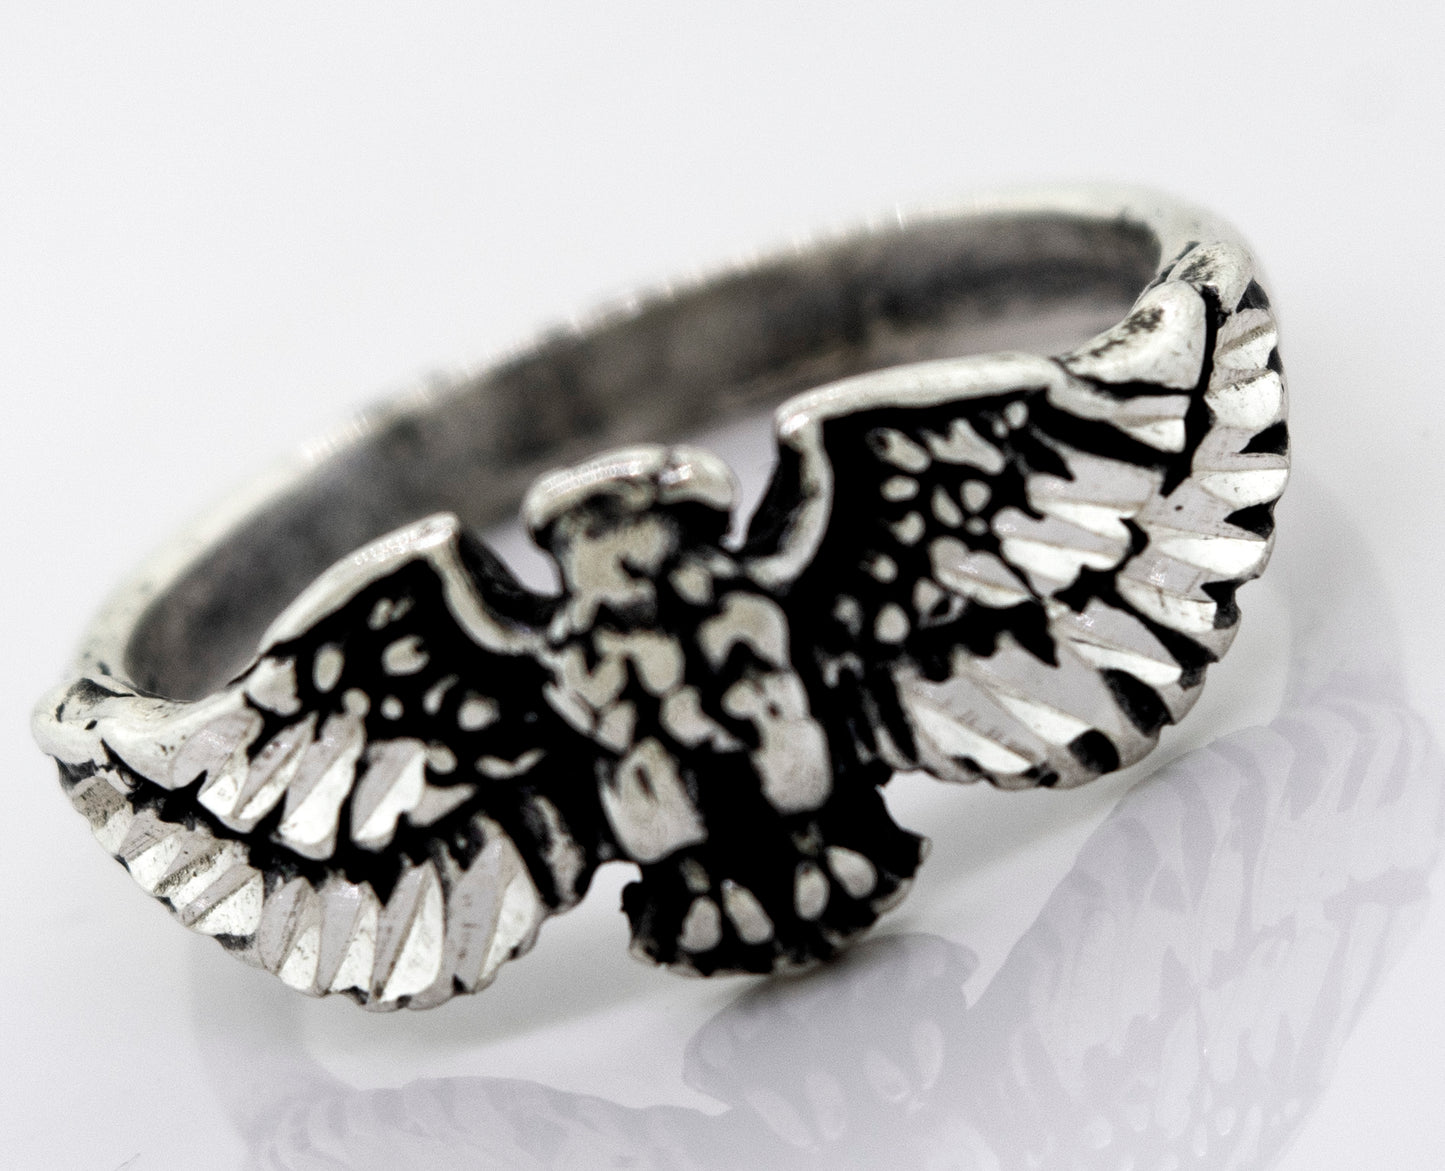 A handcrafted Super Silver American Made Eagle Ring with an eagle design.